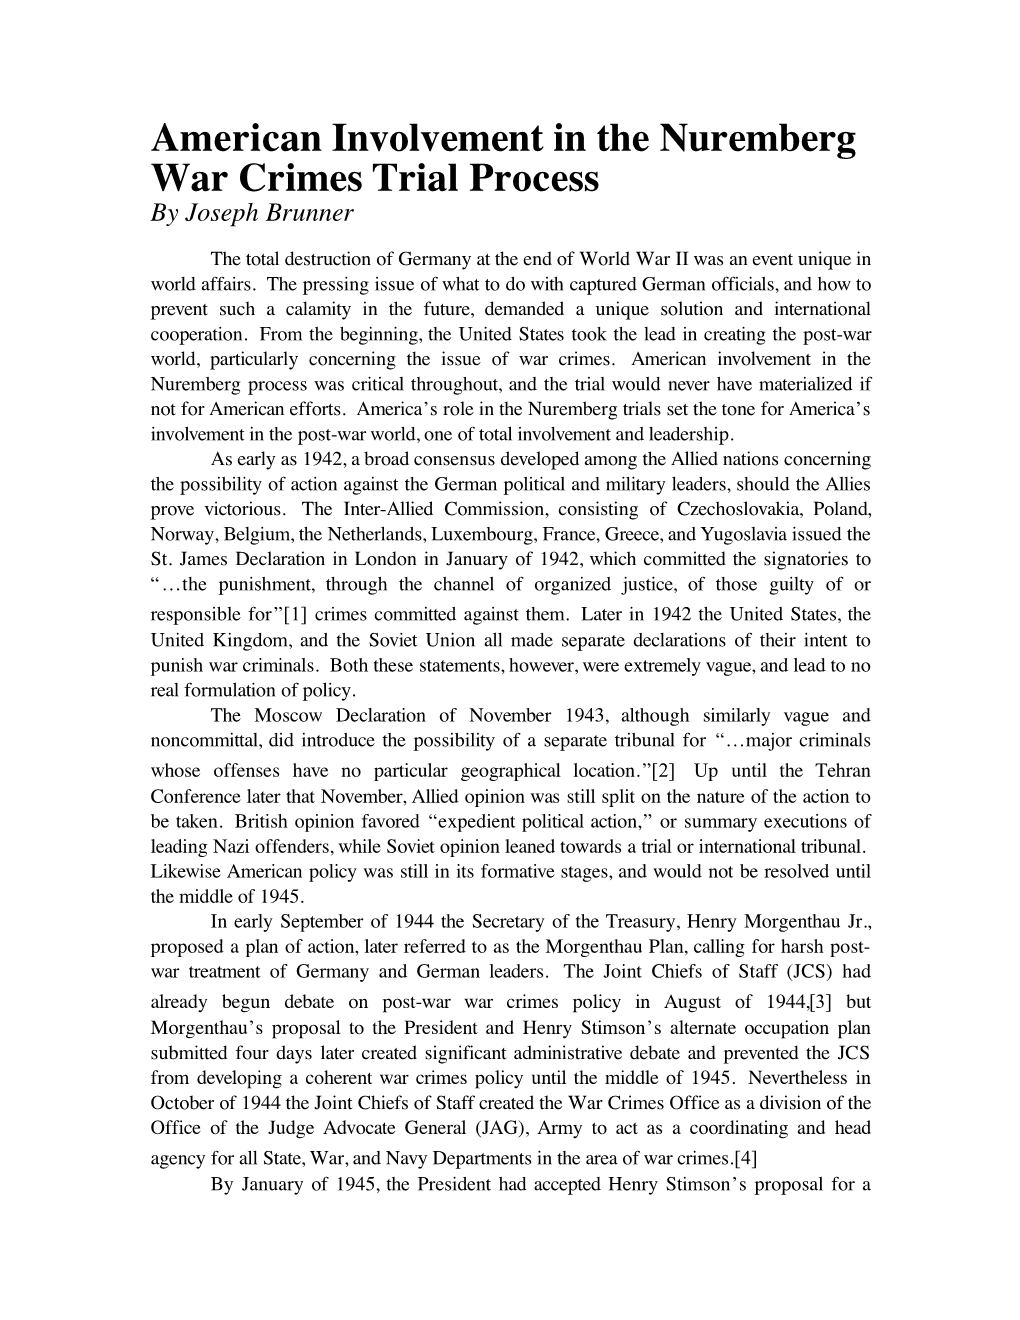 American Involvement in the Nuremberg War Crimes Trial Process by Joseph Brunner